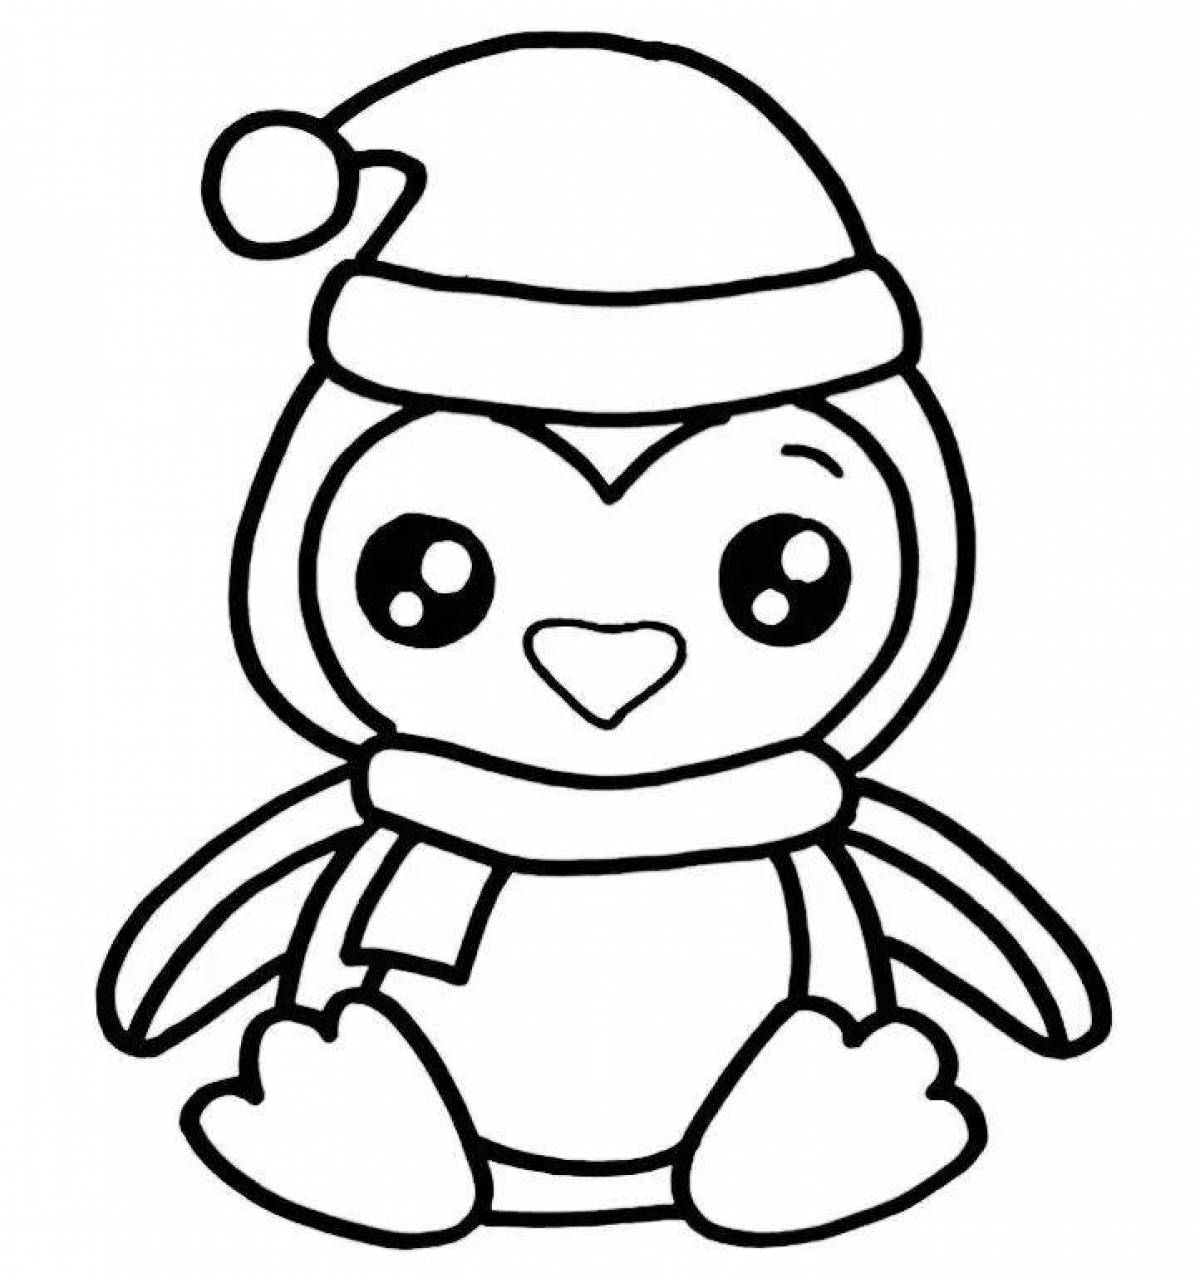 Coloring page cute and fluffy penguin